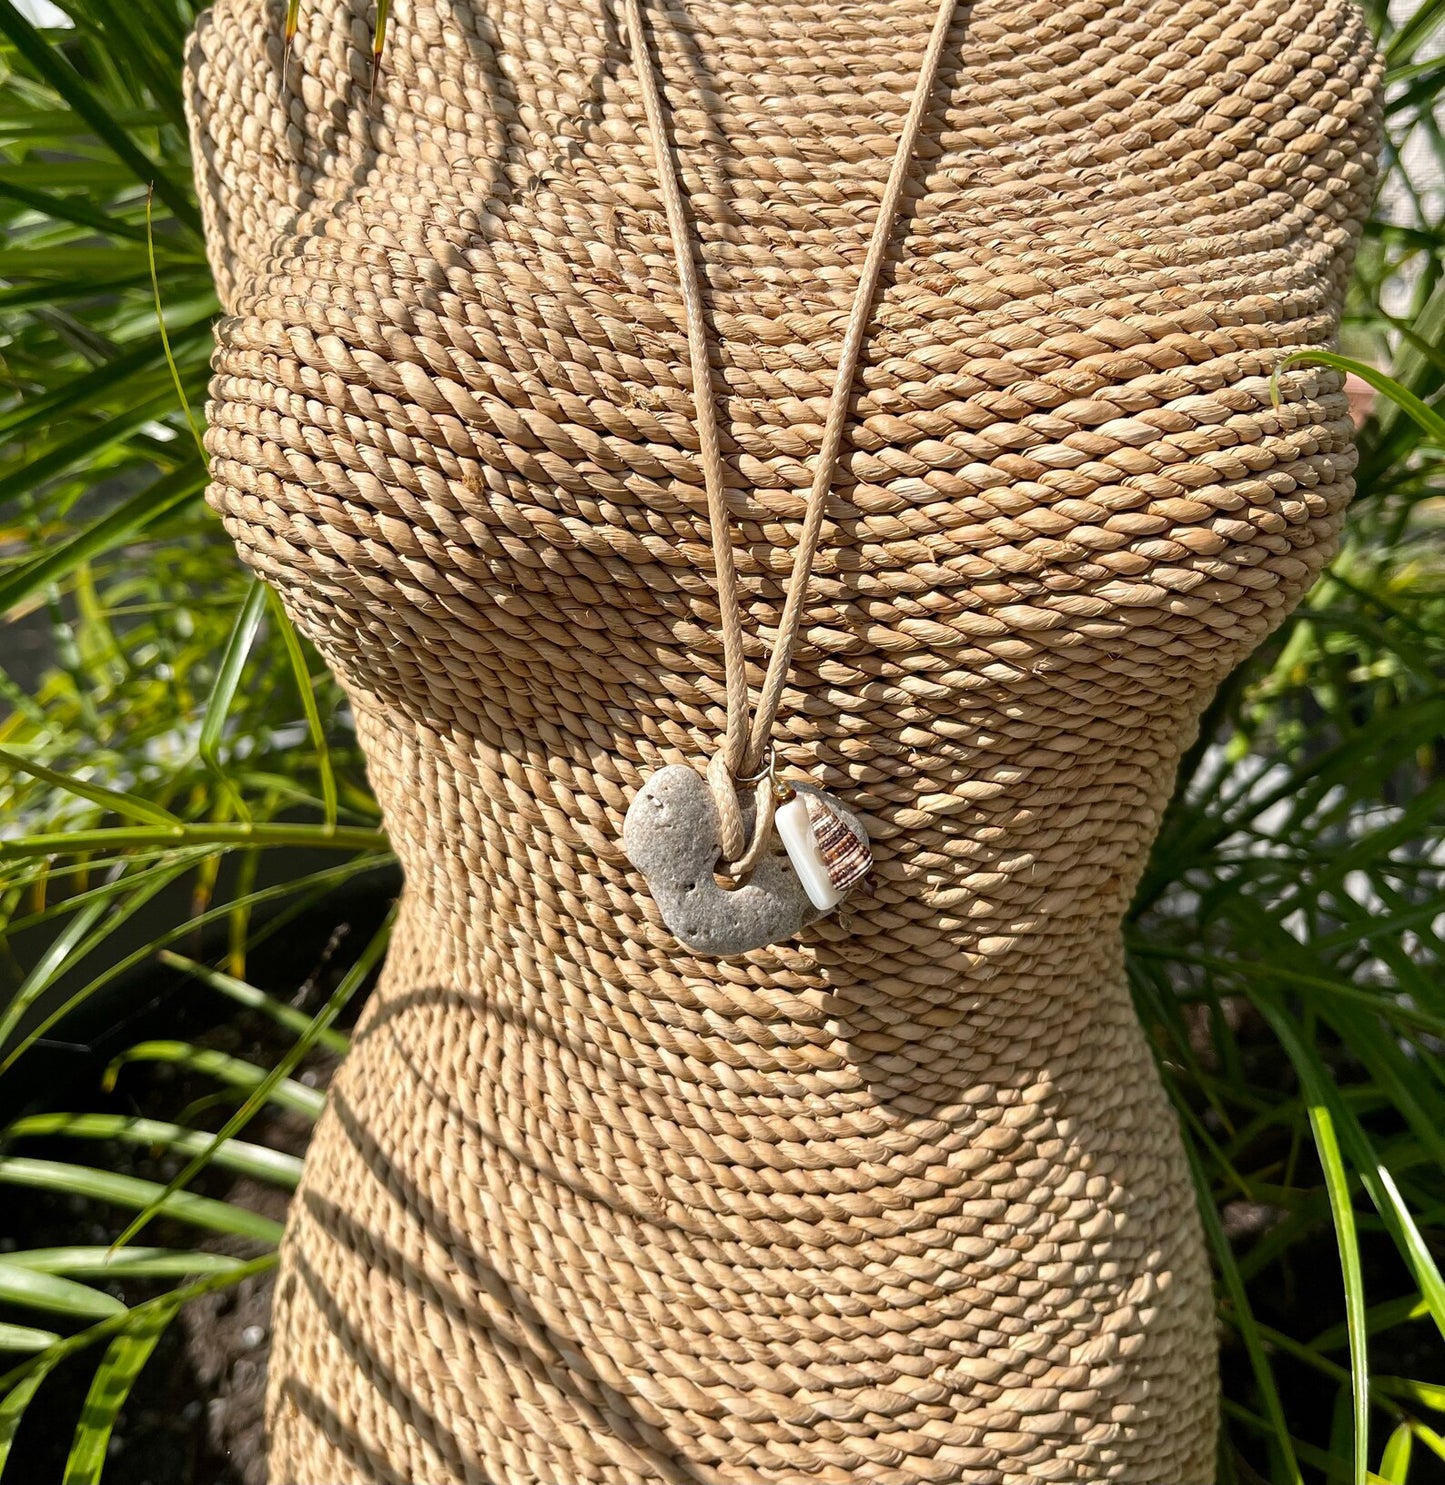 New Mermaid Collection, "Moira", Bodhi Jewelry